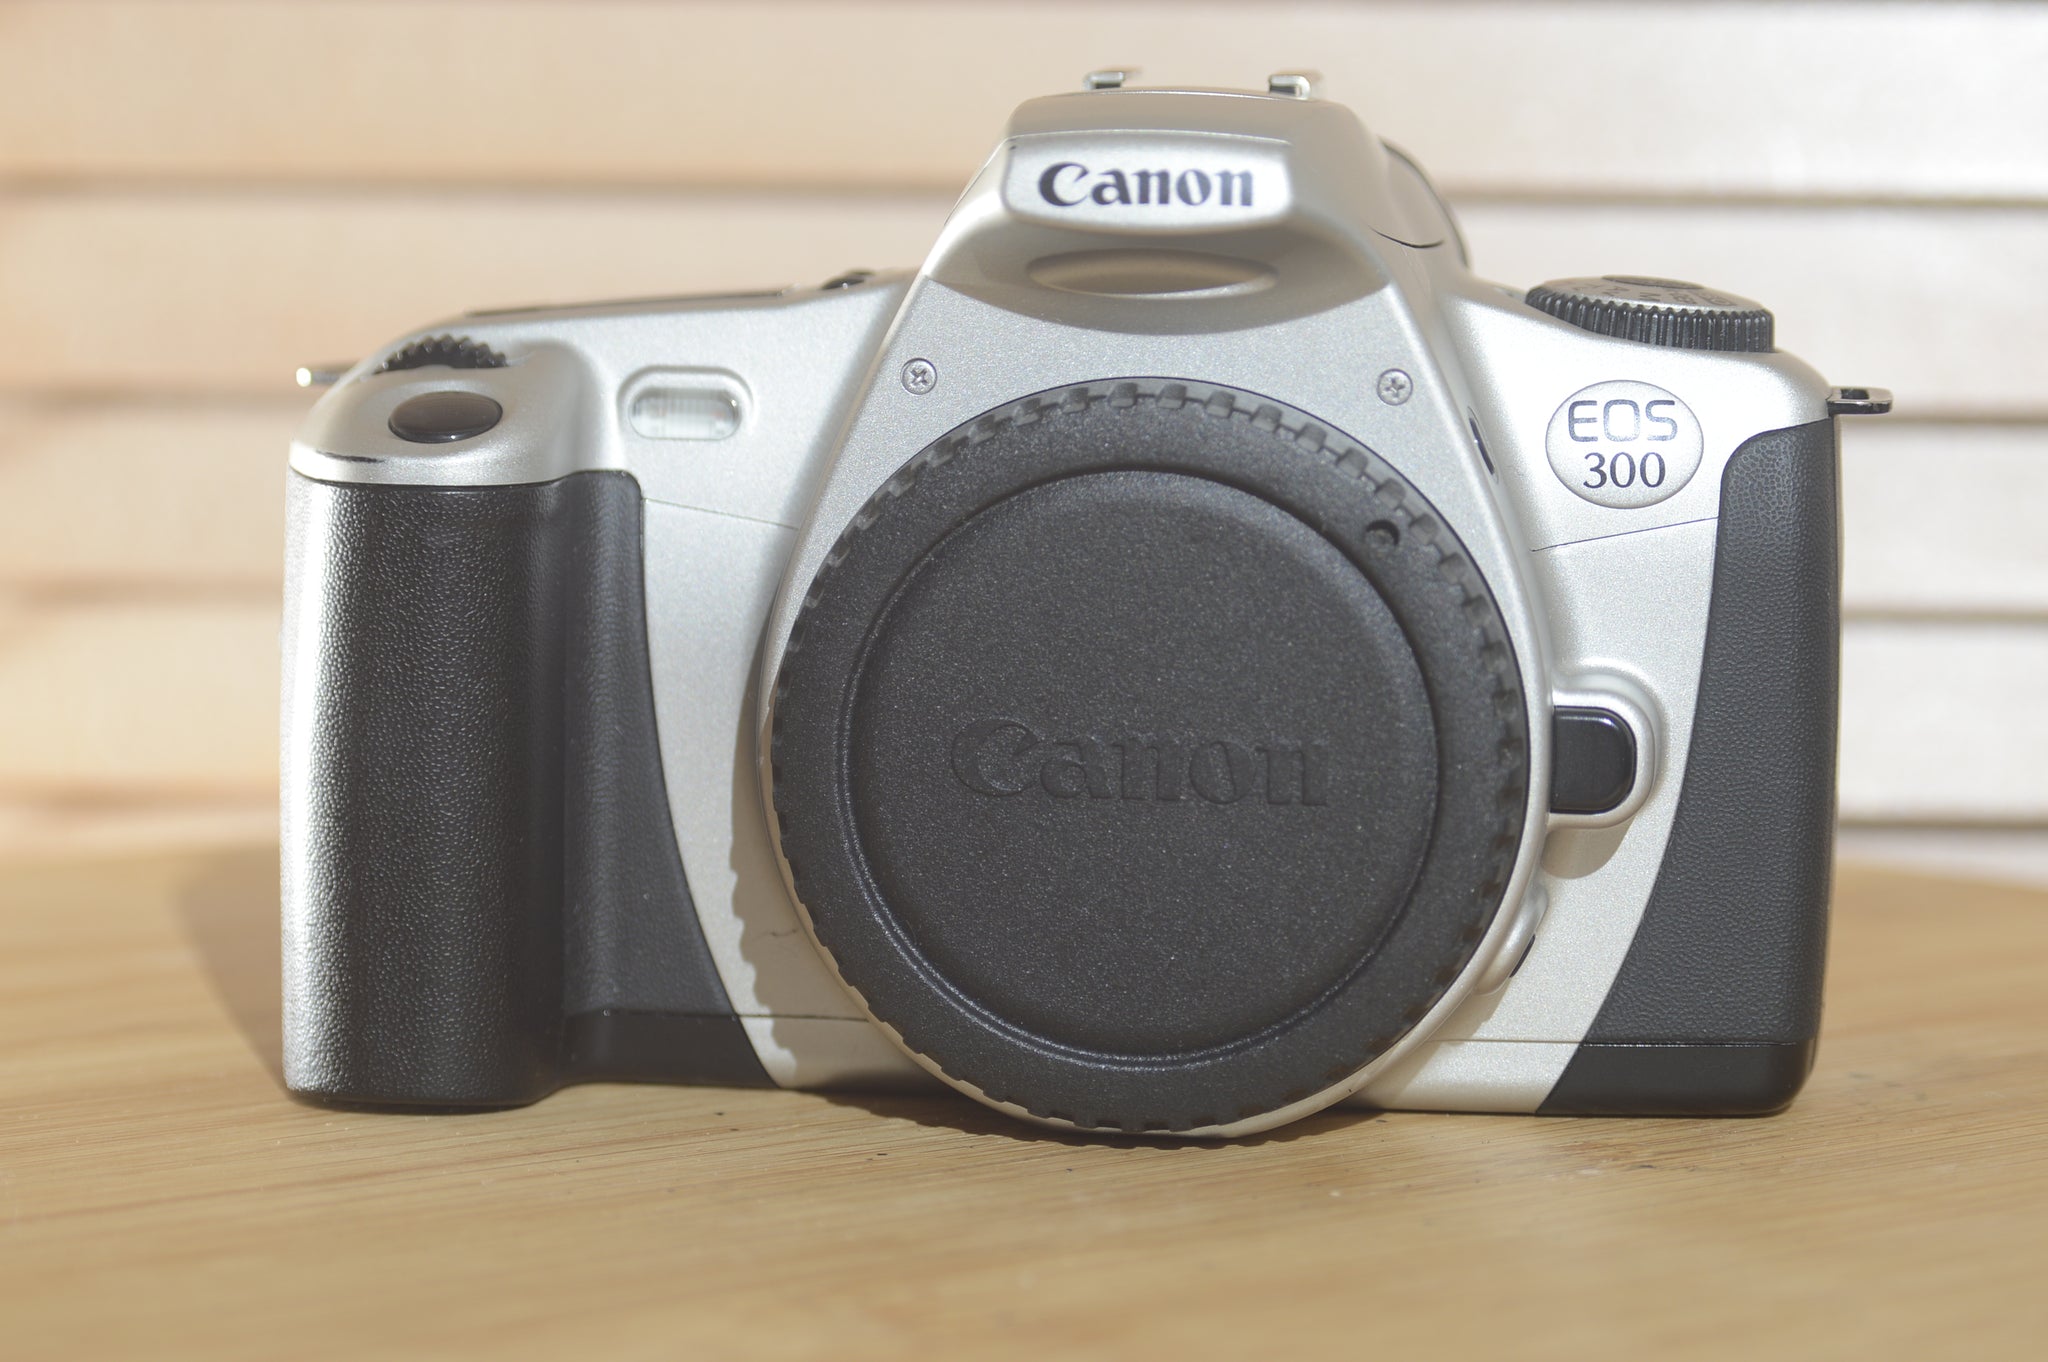 Beautiful Canon Eos 300 Camera. Full of functions a great 35mm camera taking EF lenses. Lovely addition to any level of photographer's kit. - RewindCameras quality vintage cameras, fully test